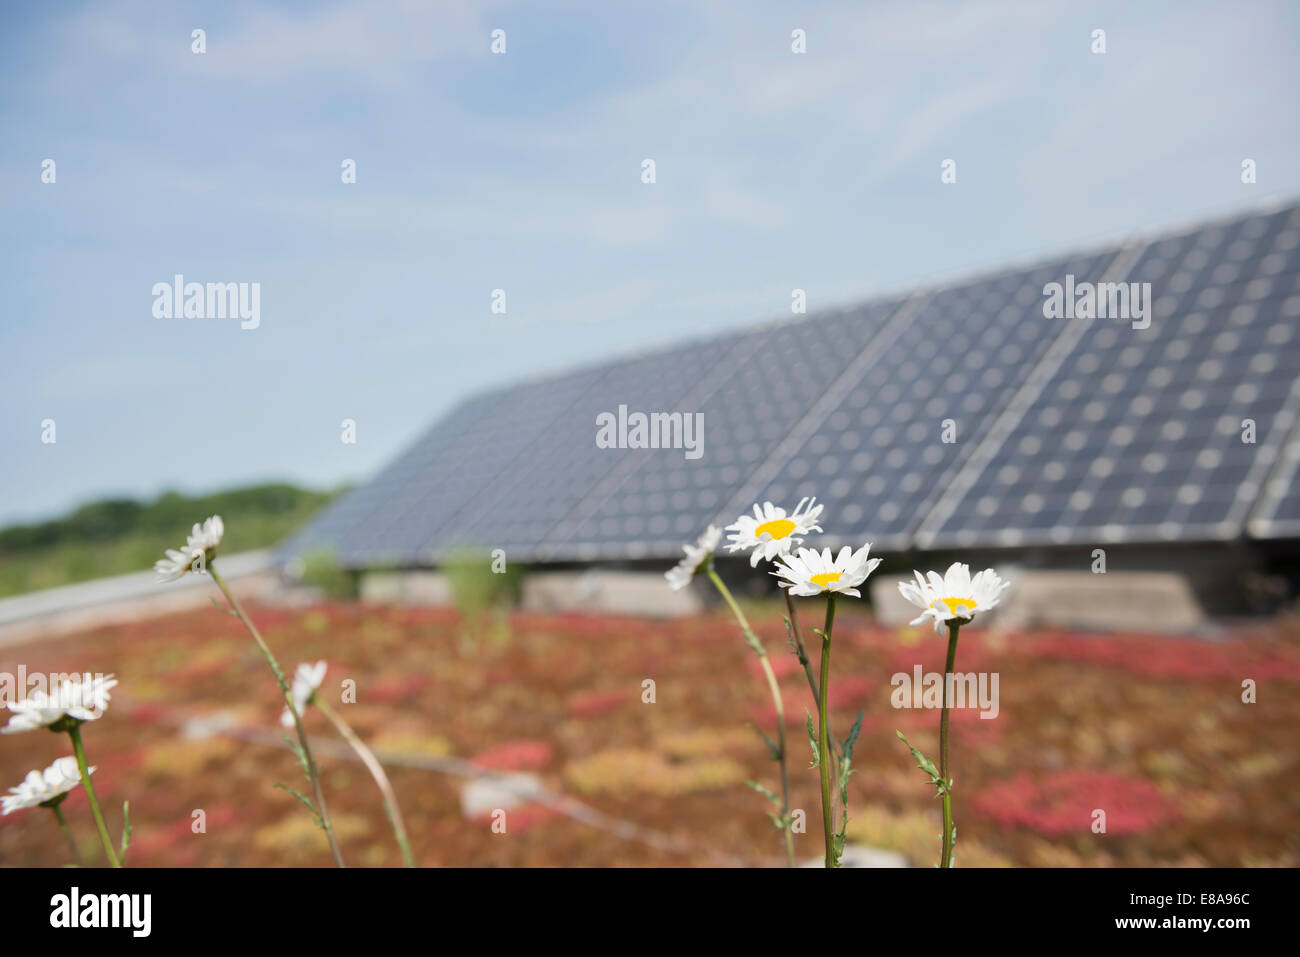 Wild flowers in front of solar panel Stock Photo